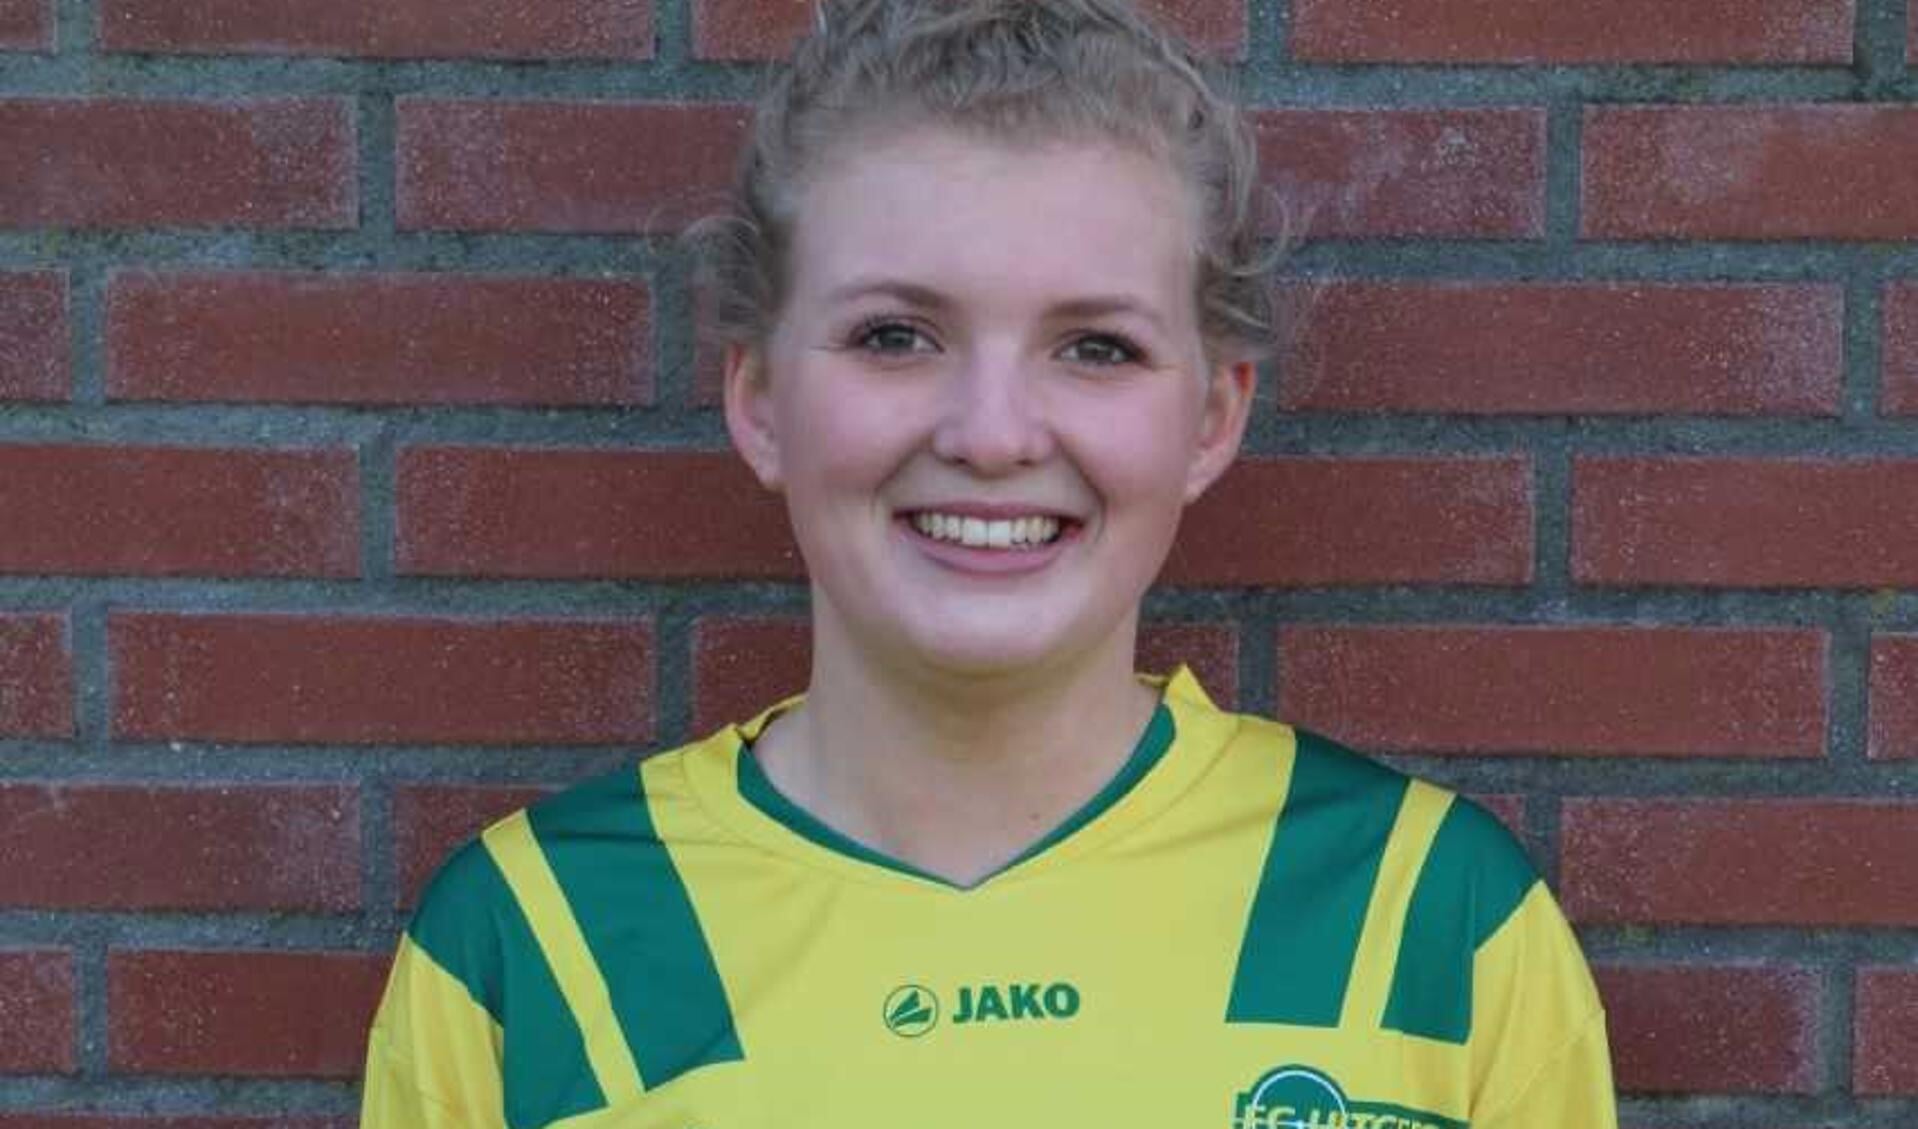 Woman of the match: Anouk Vrouwe